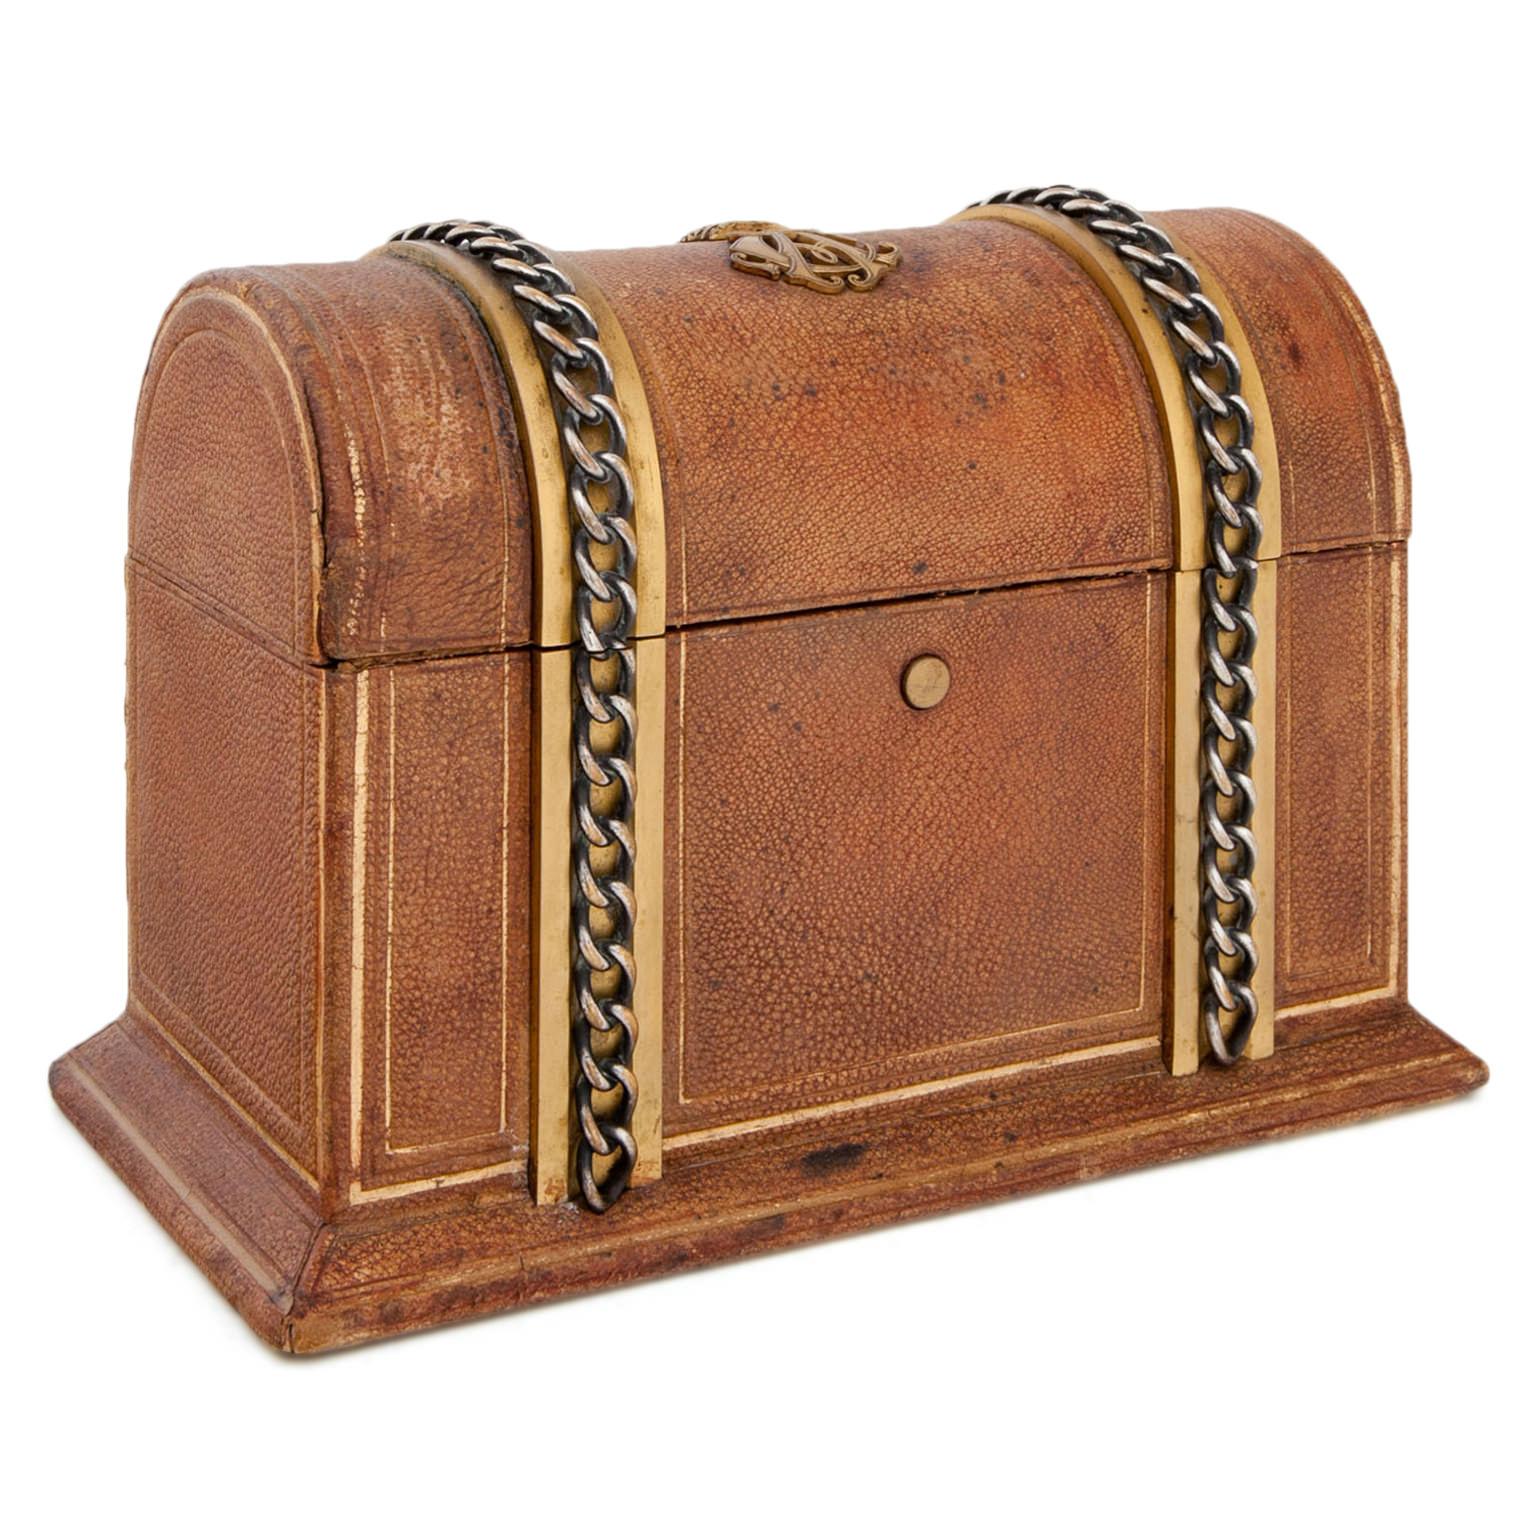 Small chest with leather cover and chain décor as well as a fitting writing case with blotting paper monogrammed CA with crown. 

Dimensions in cm (H x W x D):
Book: 29 x 23.5 x 2
Chest: 17.5 x 24 x 13